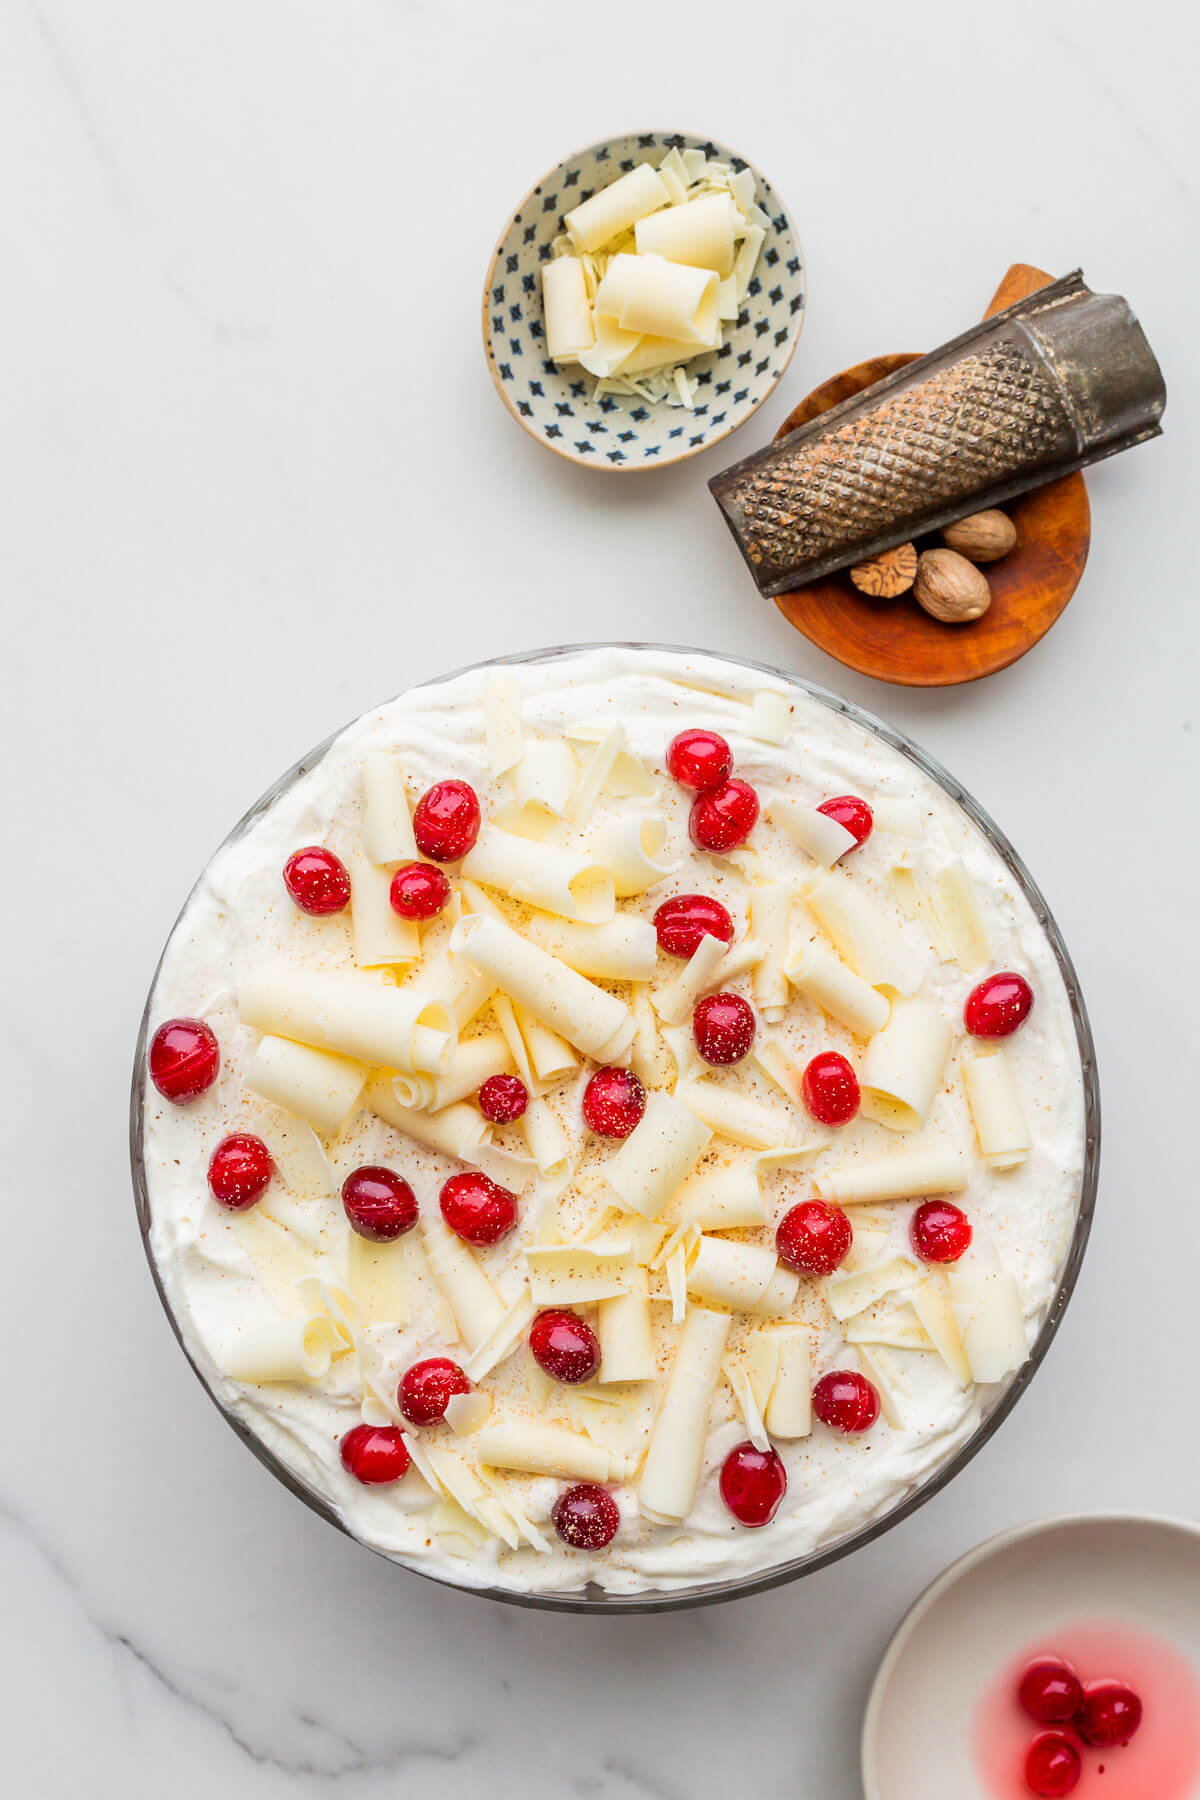 White chocolate curls, cranberries and grated nutmeg garnish the top of a Christmas trifle.